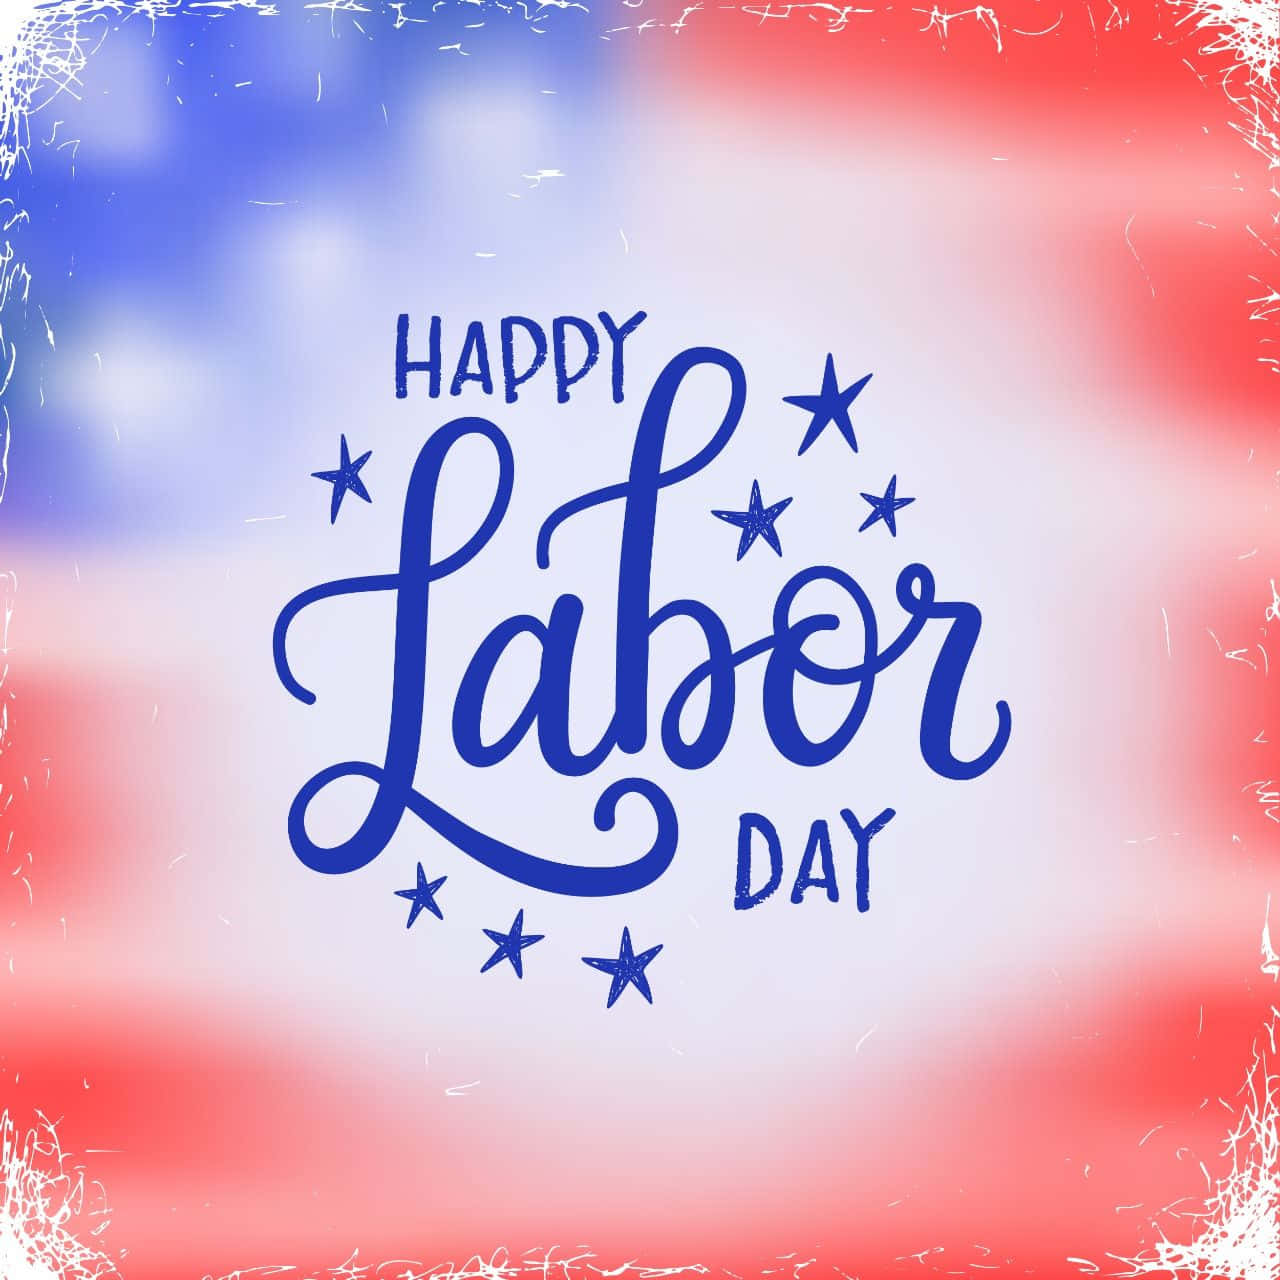 Download Labor Day Pictures | Wallpapers.com